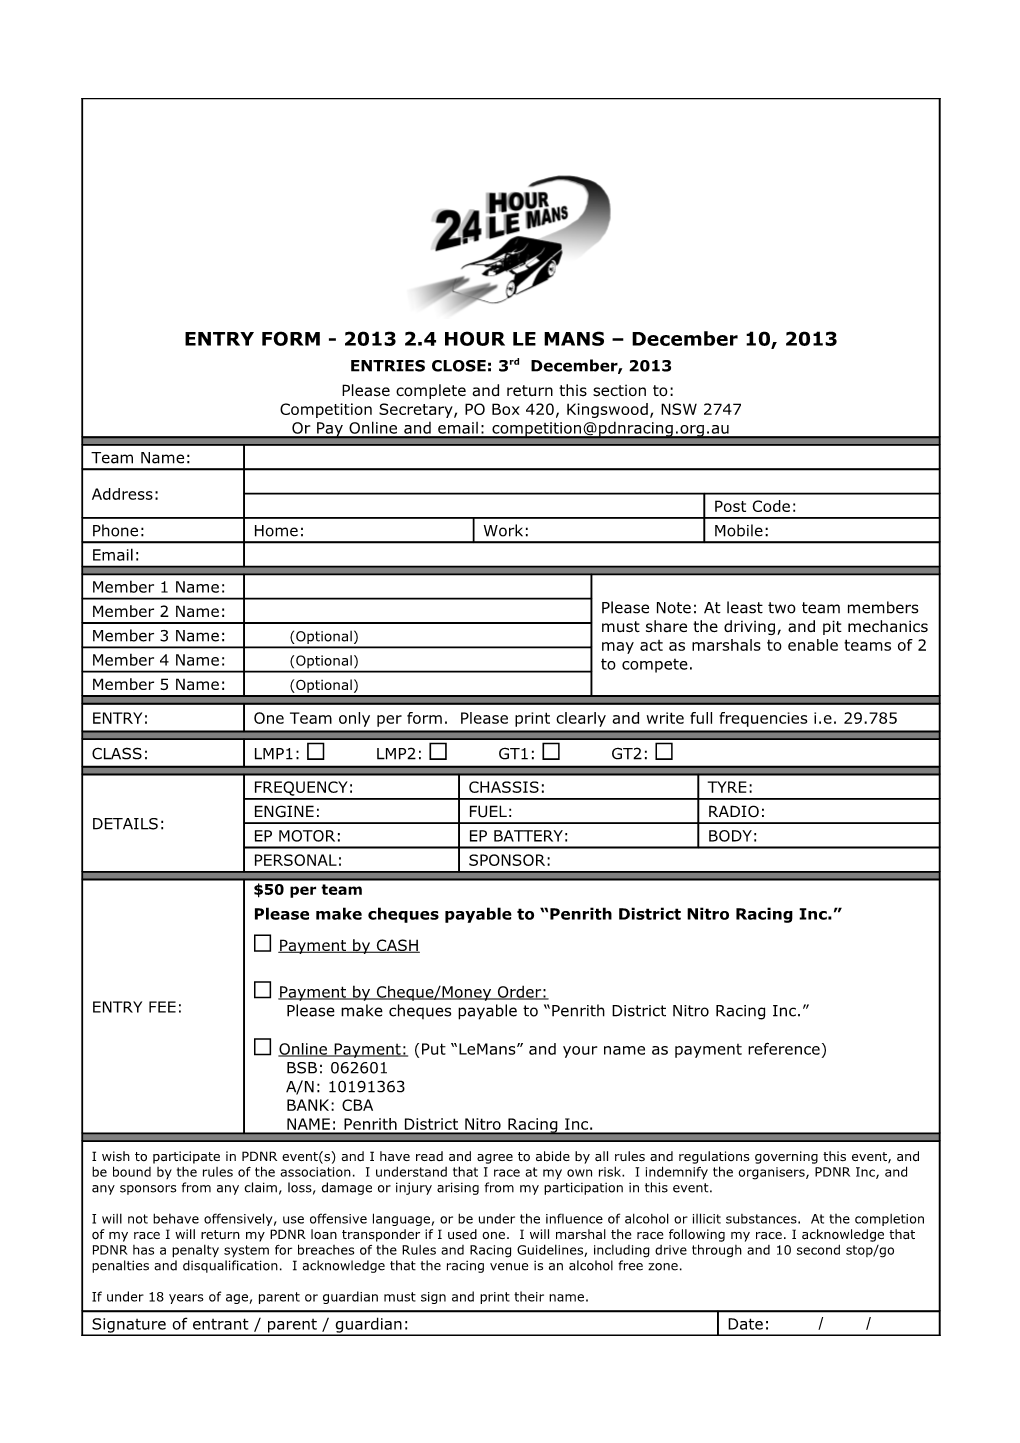 Plans and Format for 2013 2.4 Hour Le Mans